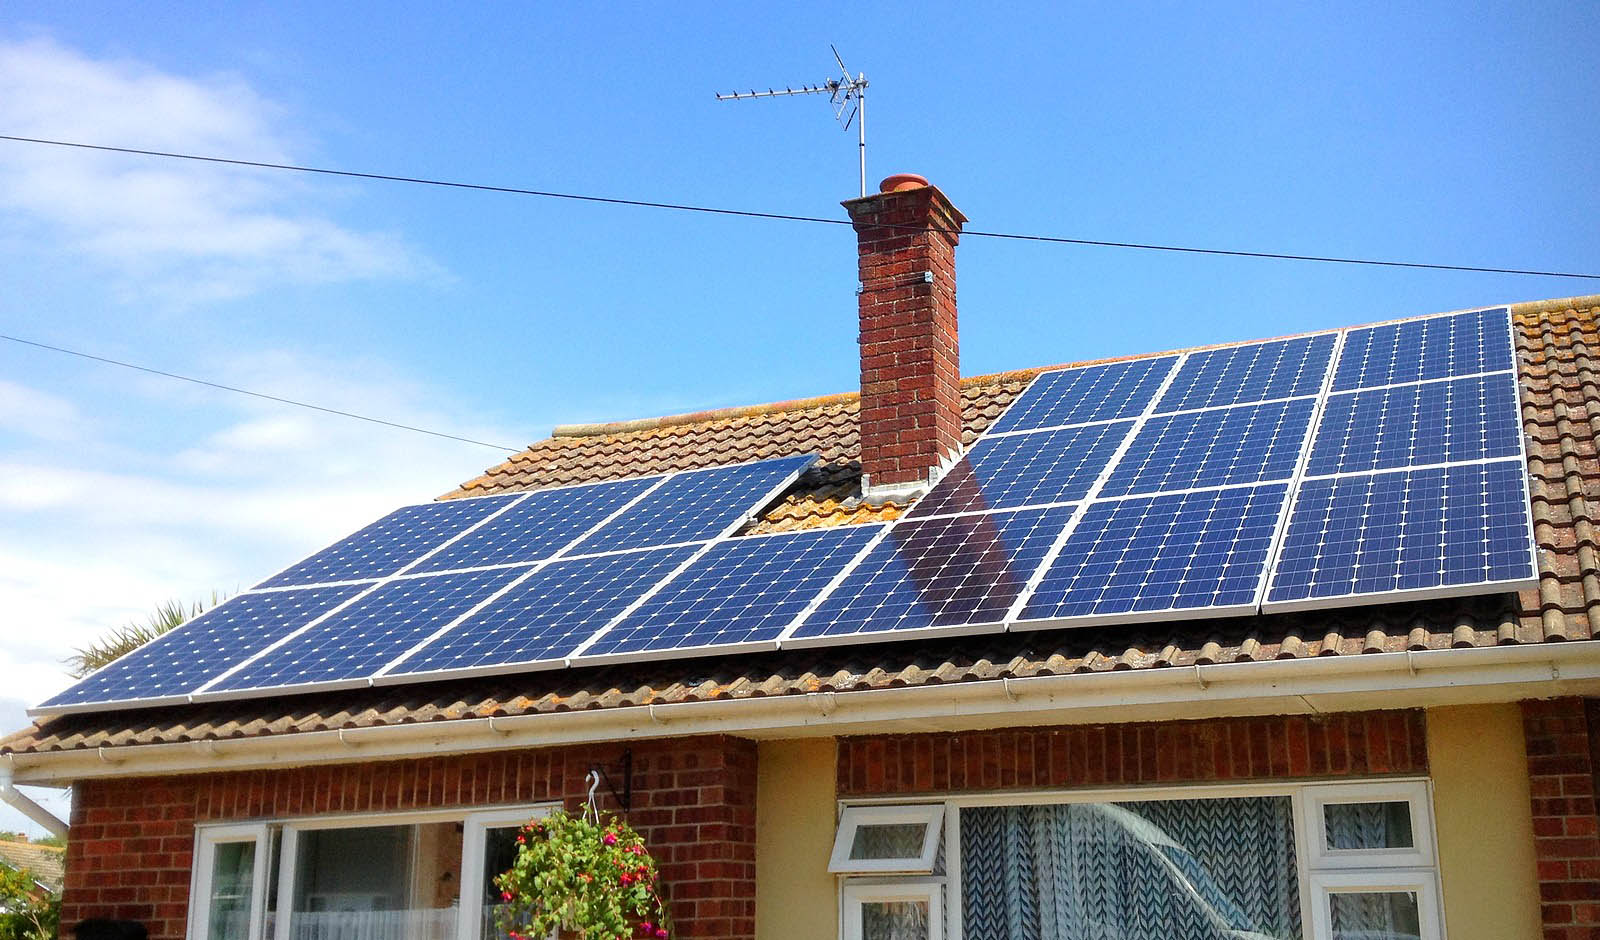 Large set of solar panels installed by Green Solar World over a detached house near Cambridge